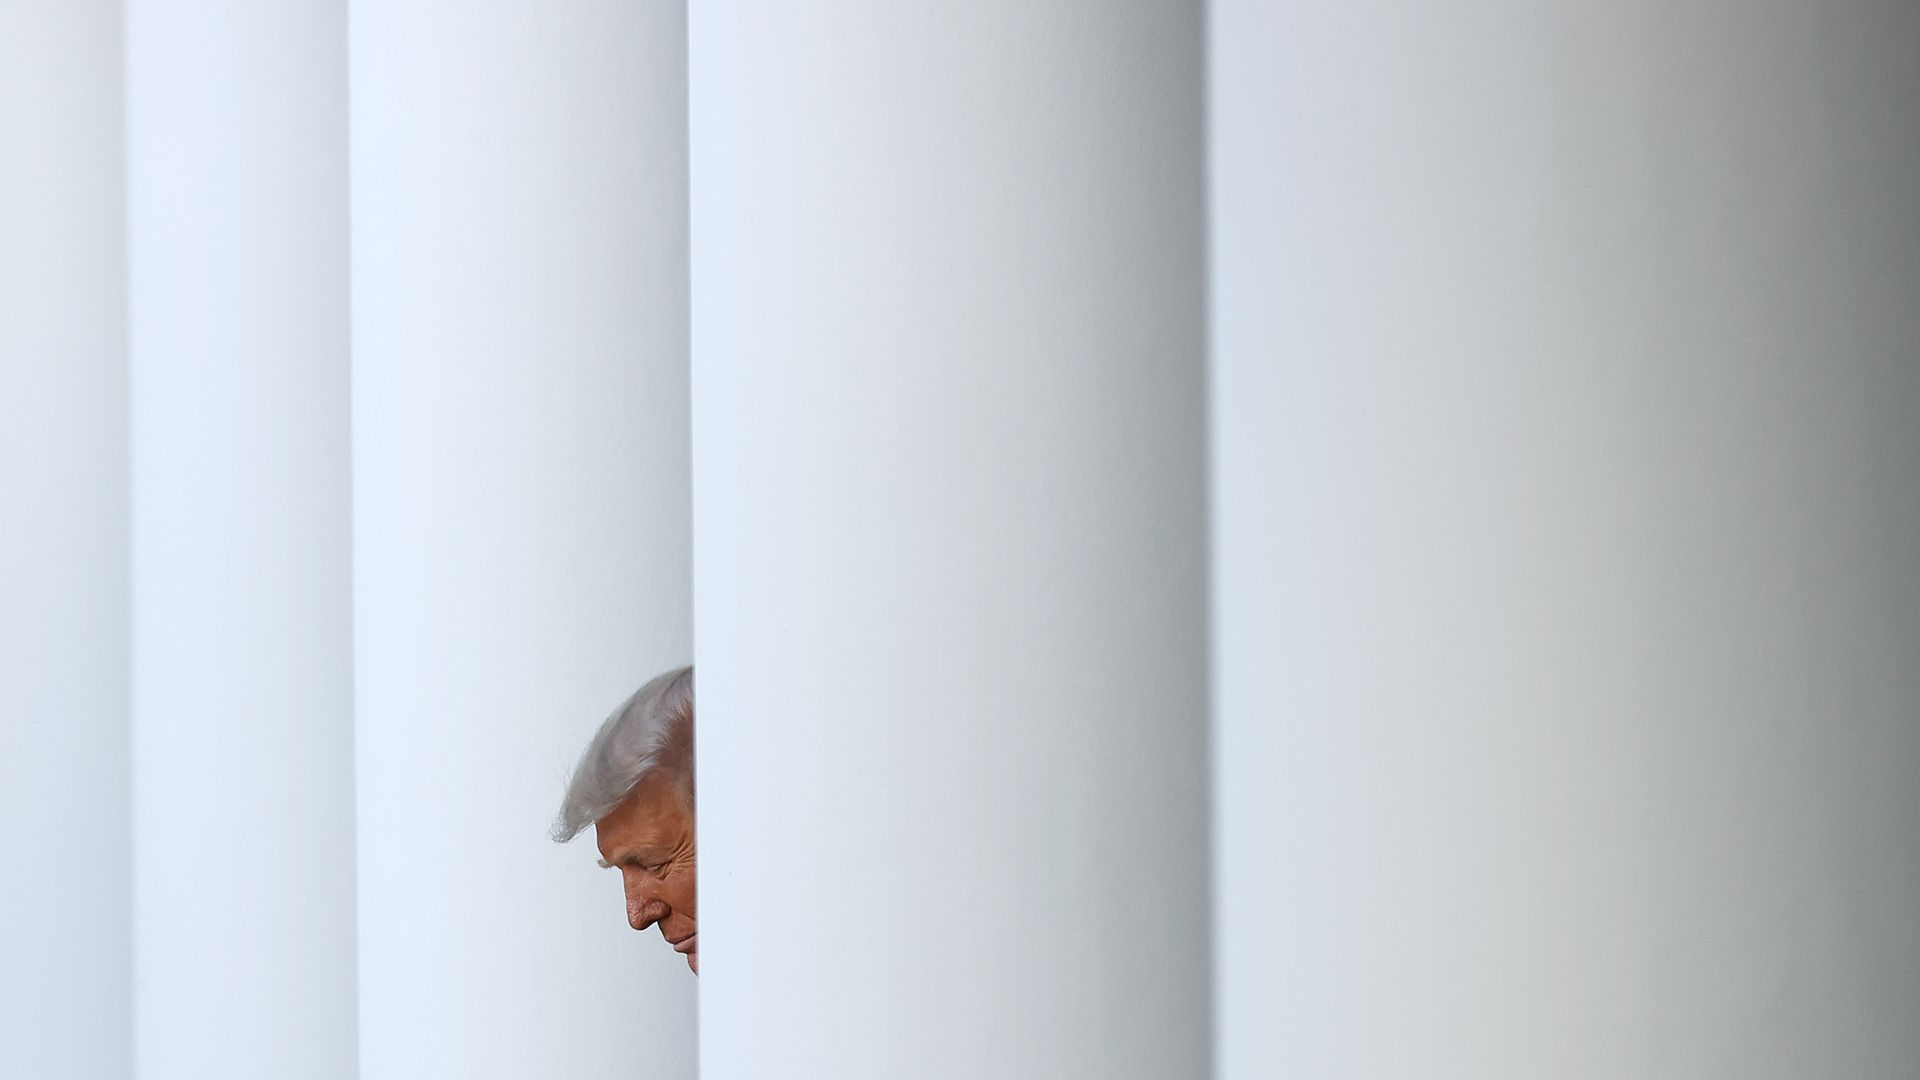 President Trump is seen among the Colonnade columns at the White House.